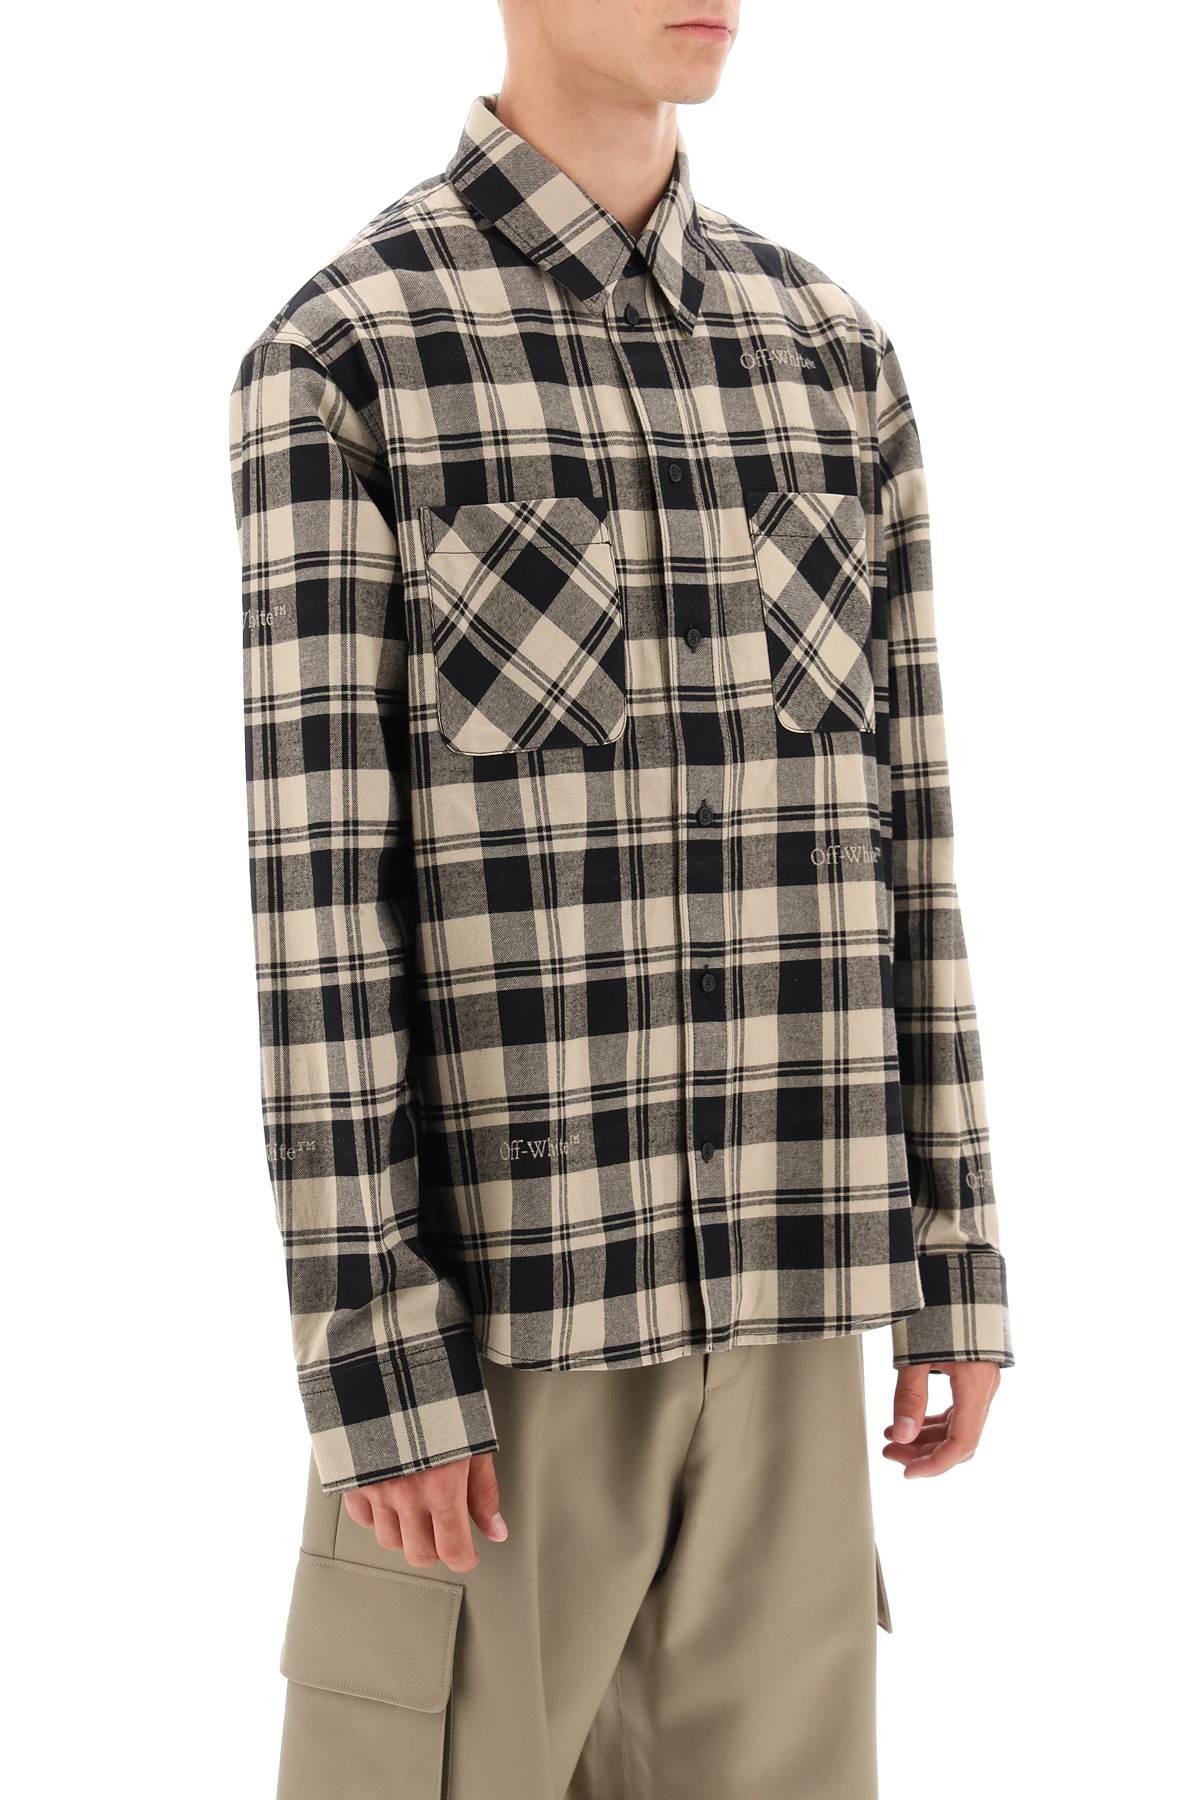 Off-White Off-white flannel shirt with logoed check motif